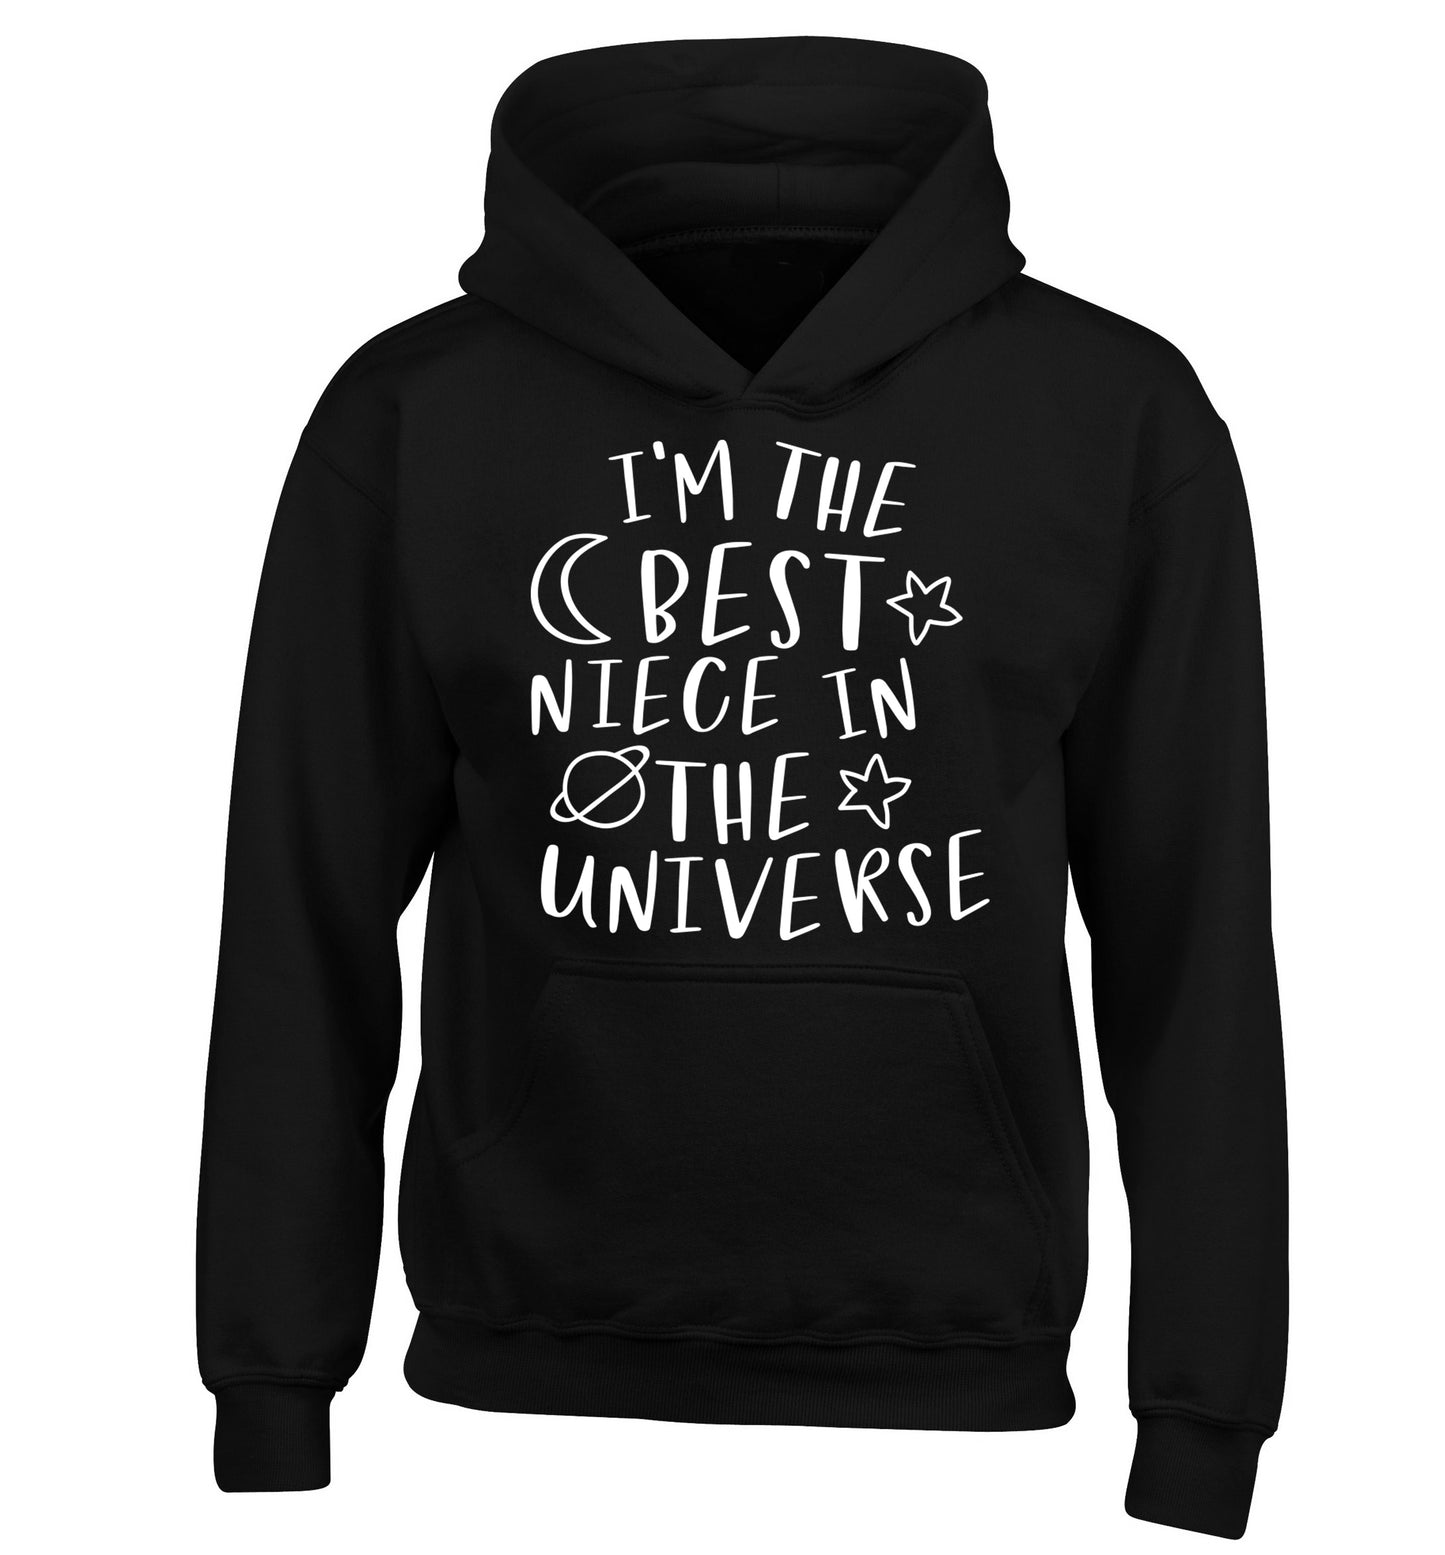 I'm the best niece in the universe children's black hoodie 12-13 Years